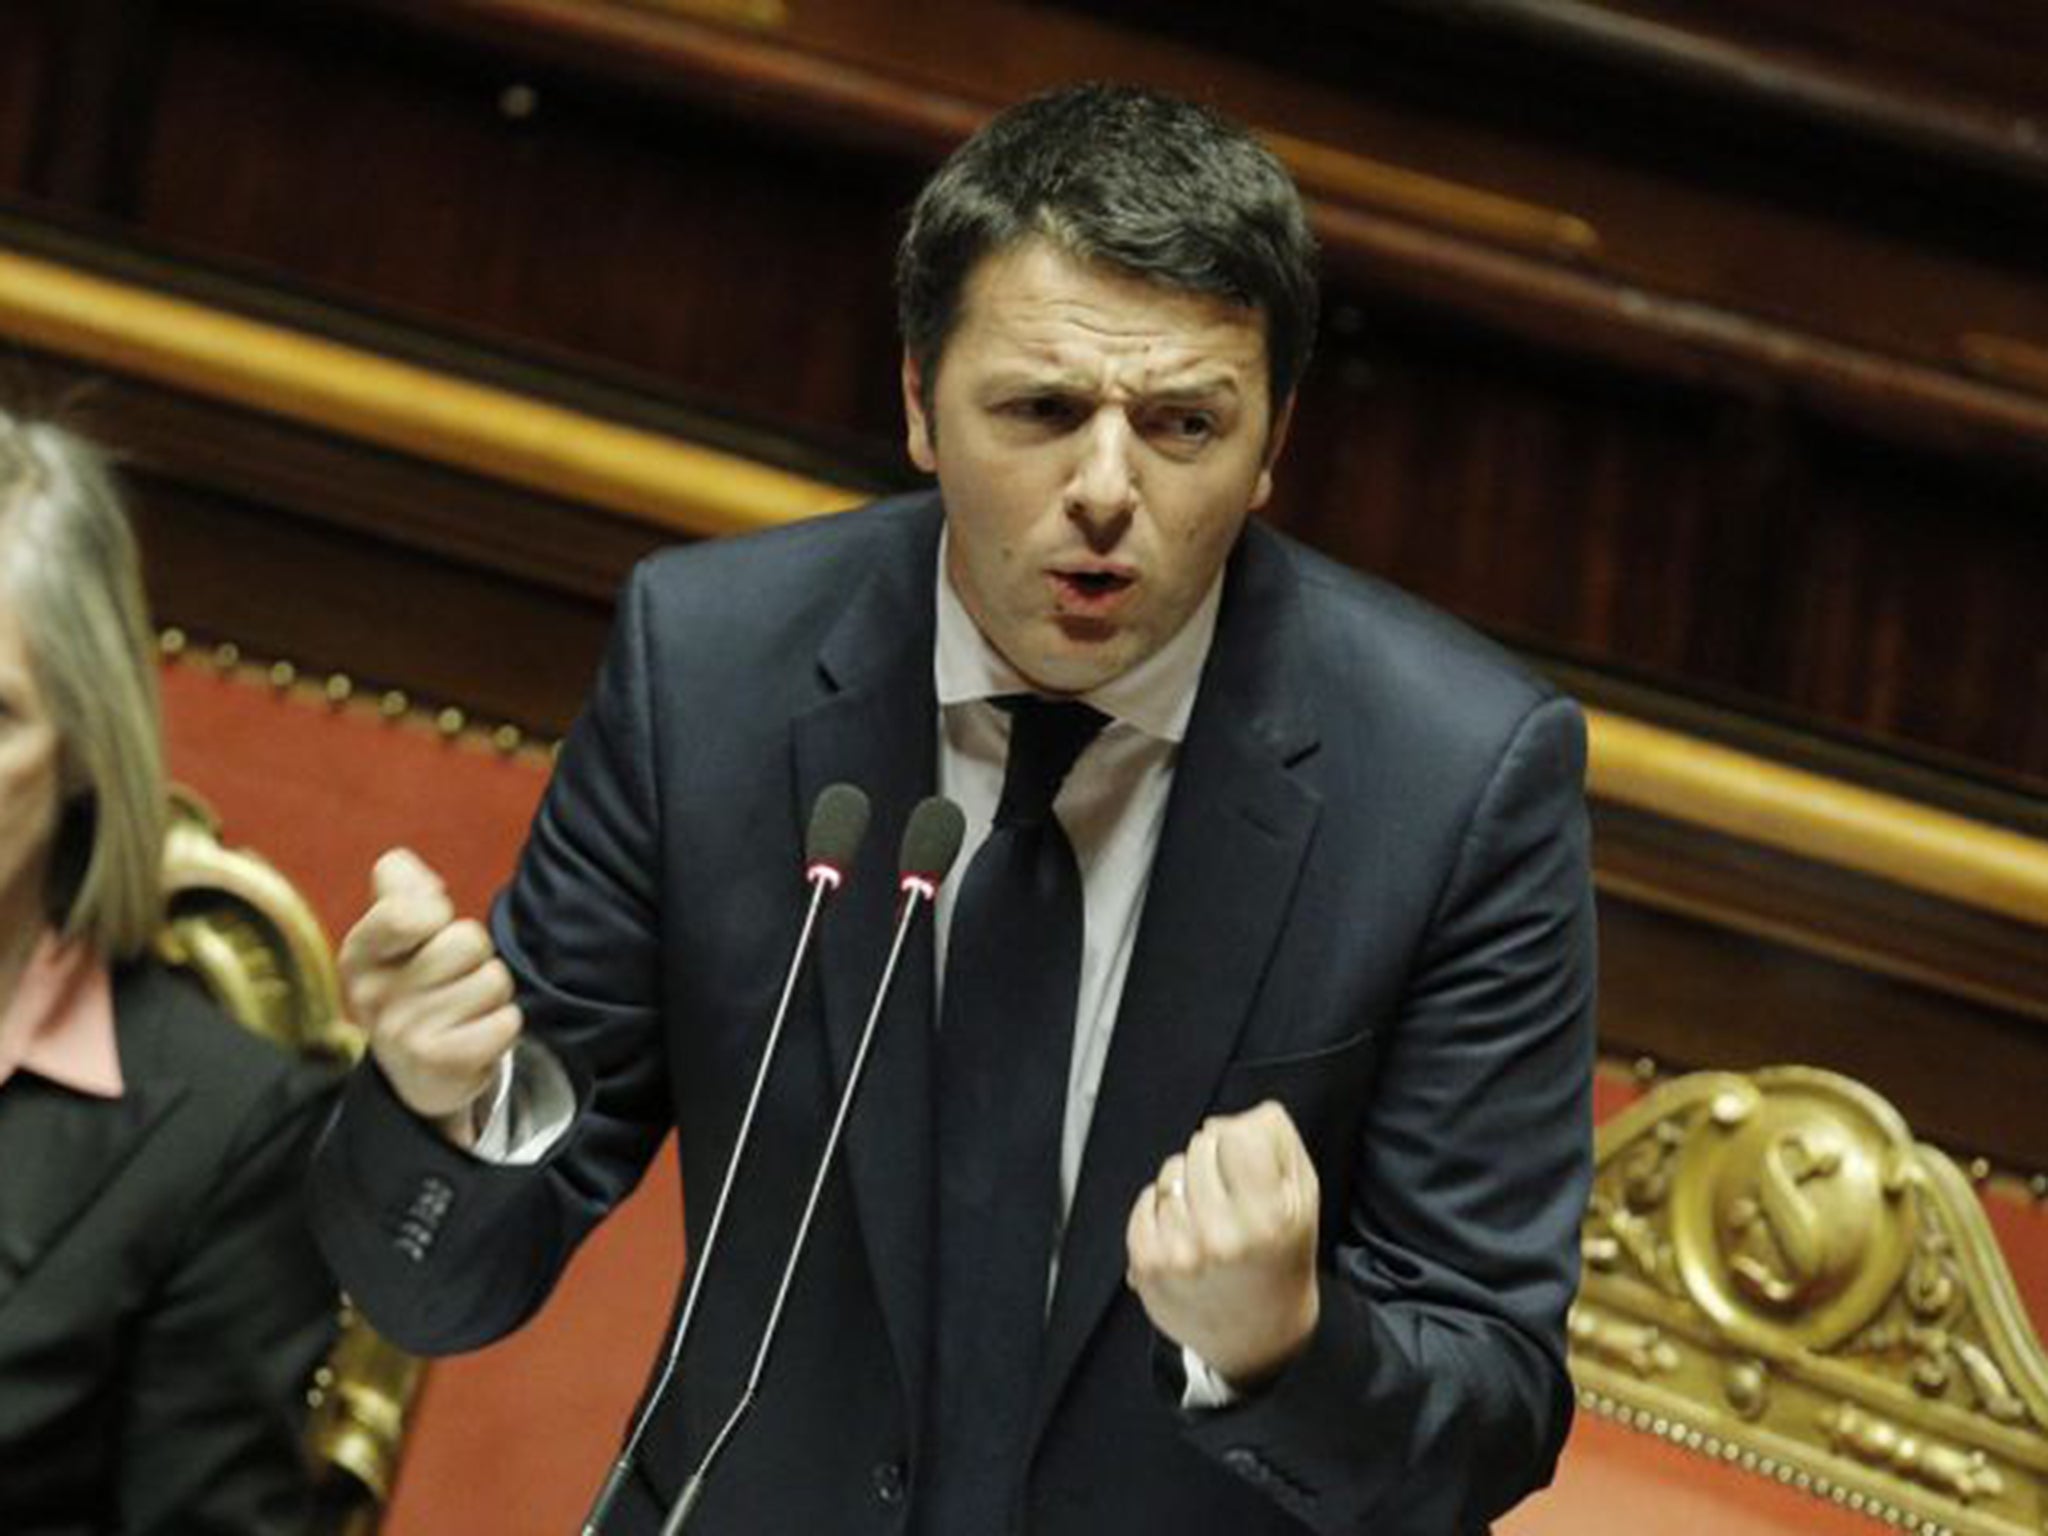 Citizens of southern Italy say they have been abandoned by Prime Minister Matteo Renzi